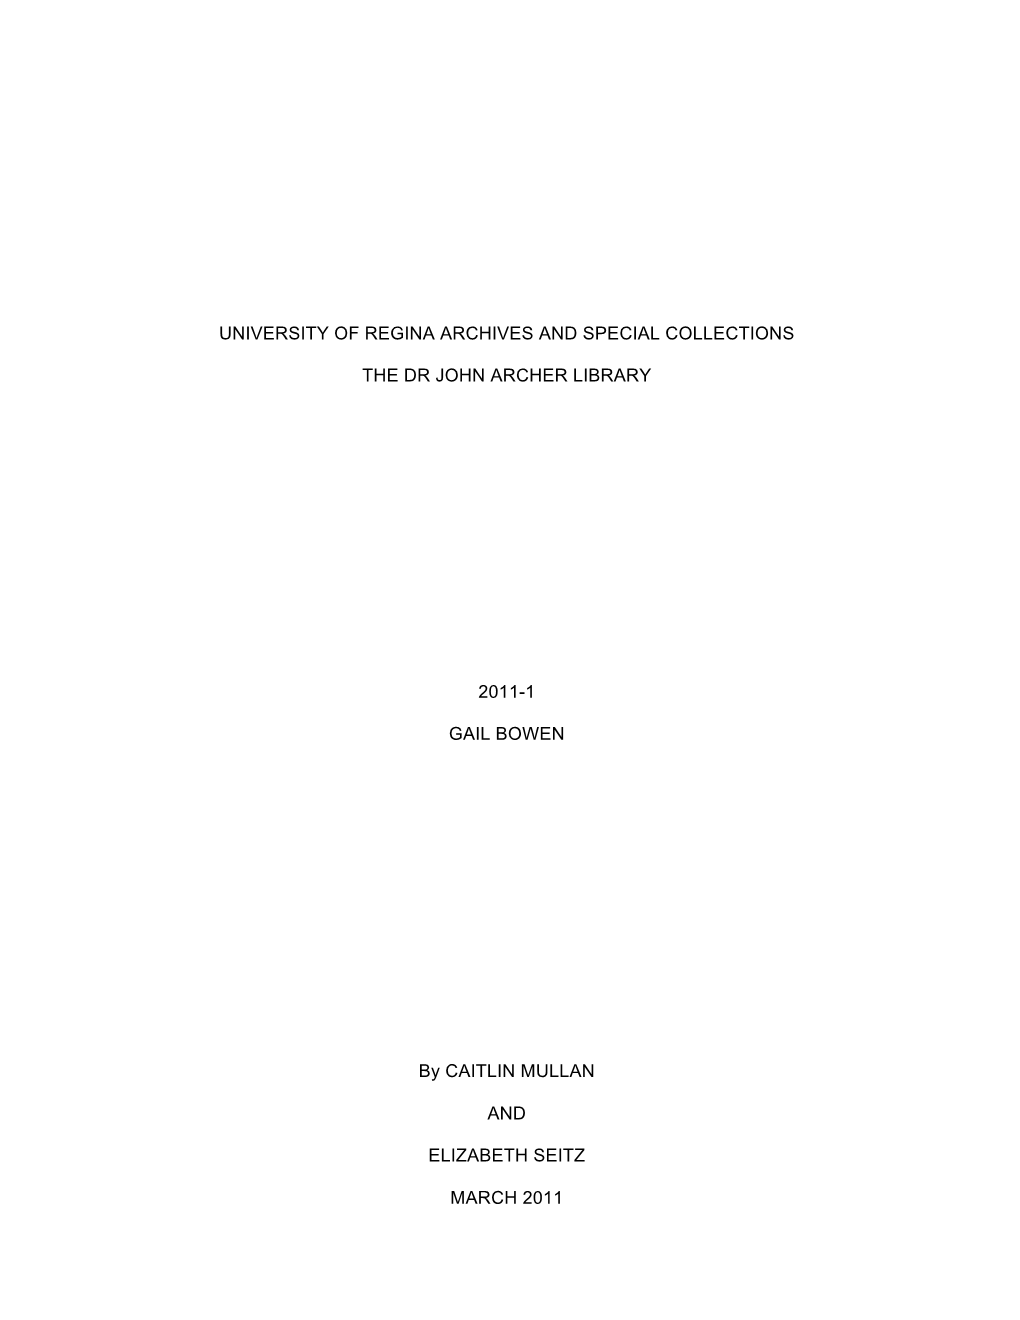 University of Regina Archives and Special Collections The